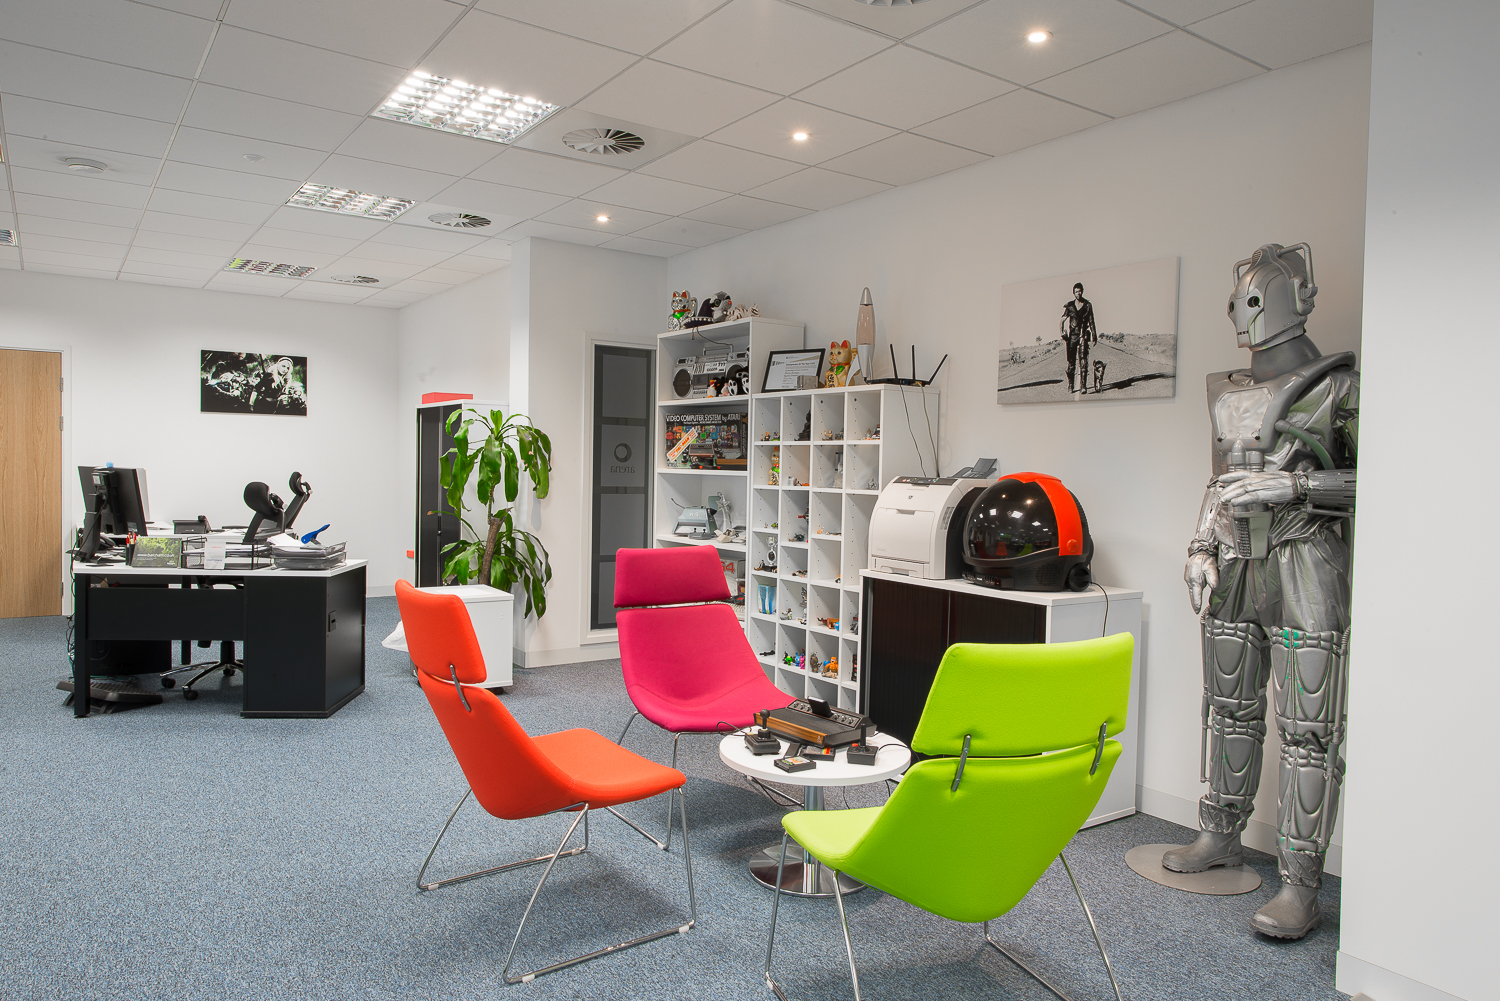 interior-photography-commercial-dorset-arena-business-centres-10.jpg